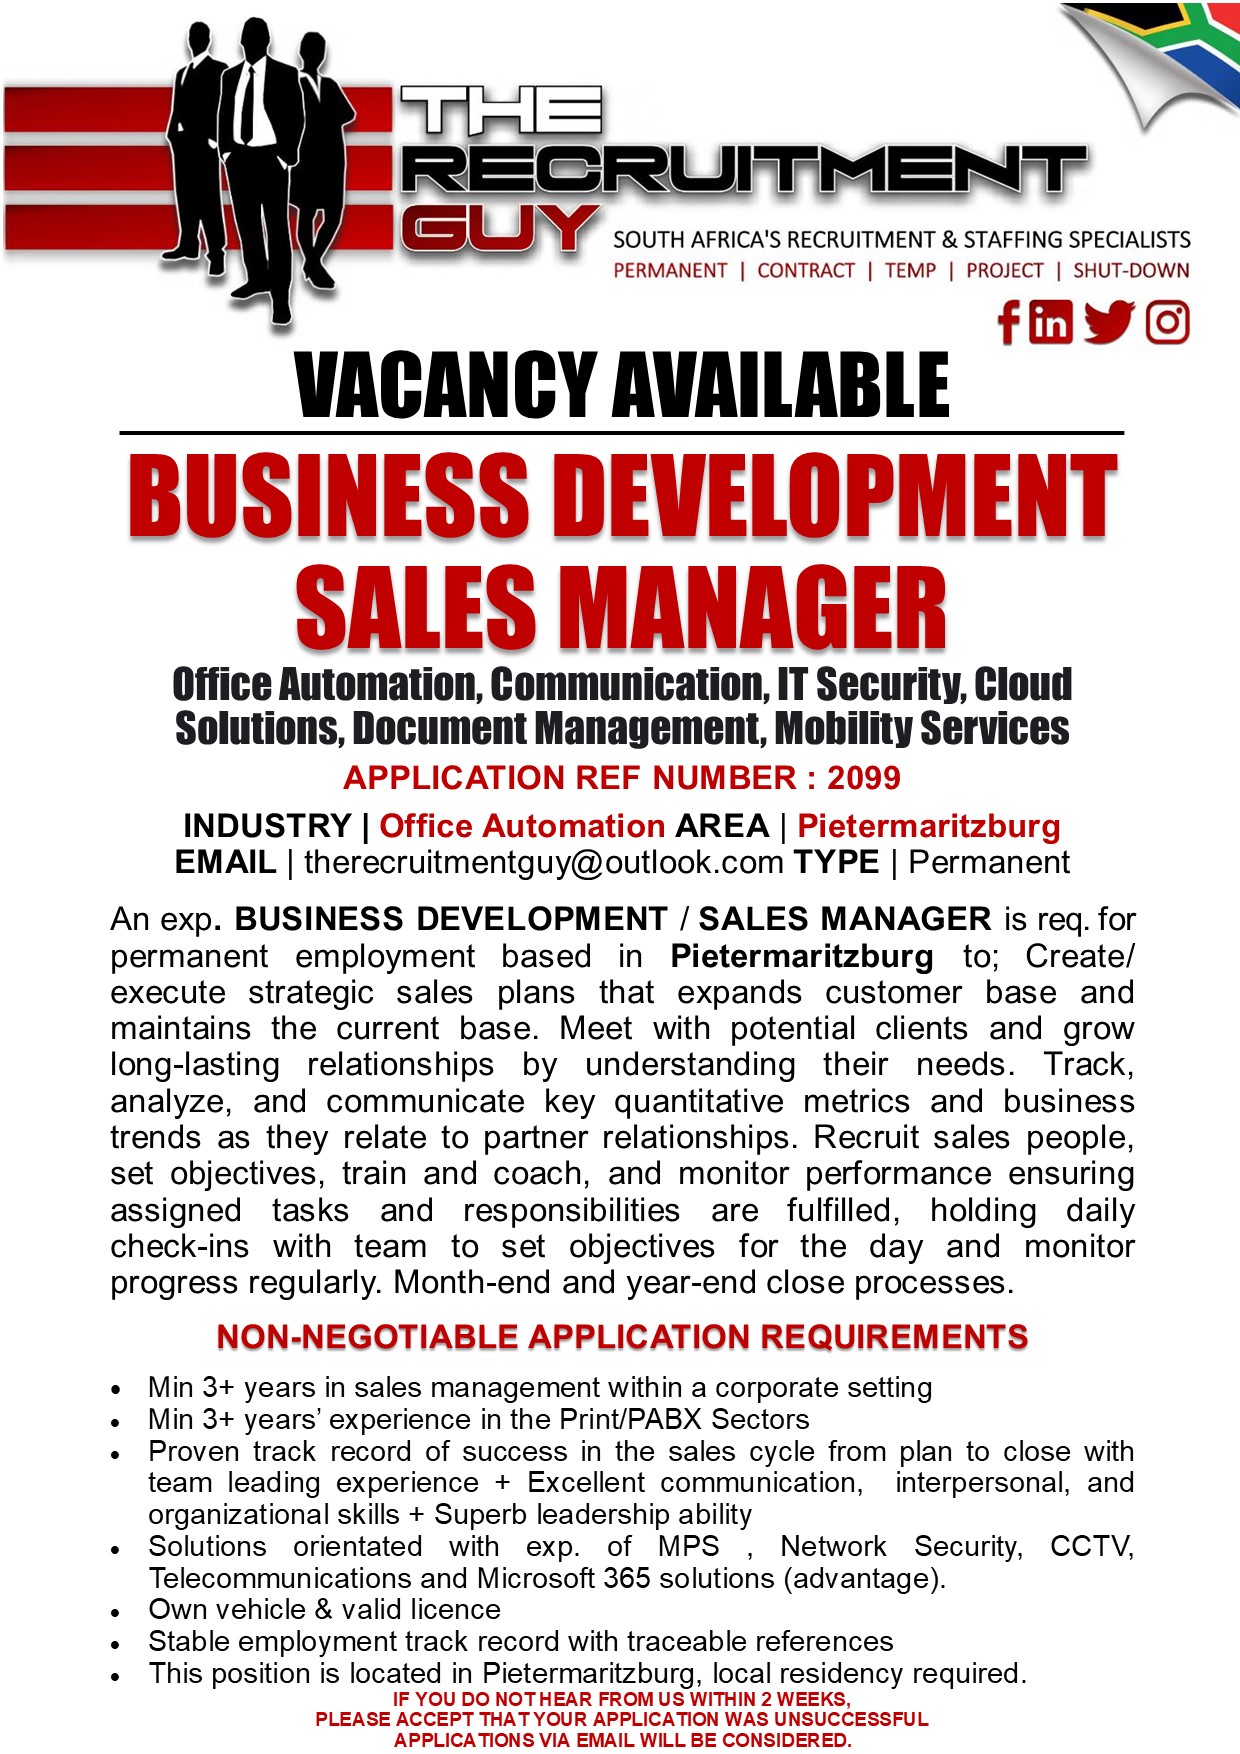 VACANCY AVAILABLE

BUSINESS DEVELOPMENT
SALES MANAGER

Office Automation, Communication, IT Security, Cloud
Solutions, Document Management, Mobility Services
APPLICATION REF NUMBER : 2099

INDUSTRY | Office Automation AREA | Pietermaritzburg
EMAIL | therecruitmentguy@outlook.com TYPE | Permanent

An exp. BUSINESS DEVELOPMENT / SALES MANAGER is req. for
permanent employment based in Pietermaritzburg to; Create/
execute strategic sales plans that expands customer base and
maintains the current base. Meet with potential clients and grow
long-lasting relationships by understanding their needs. Track,
analyze, and communicate key quantitative metrics and business
trends as they relate to partner relationships. Recruit sales people,
set objectives, train and coach, and monitor performance ensuring
assigned tasks and responsibilities are fulfilled, holding daily
check-ins with team to set objectives for the day and monitor
progress regularly. Month-end and year-end close processes.

NON-NEGOTIABLE APPLICATION REQUIREMENTS

+ Min 3+ years in sales management within a corporate setting

+ Min 3+ years’ experience in the Print/PABX Sectors

« Proven track record of success in the sales cycle from plan to close with
team leading experience + Excellent communication, interpersonal, and
organizational skills + Superb leadership ability

« Solutions orientated with exp. of MPS | Network Security, CCTV,
Telecommunications and Microsoft 365 solutions (advantage)

« Own vehicle &amp; valid licence

« Stable employment track record with traceable references

« This position is located in Pietermaritzburg, local residency required
IF YOU DO NOT HEAR FROM US WITHIN 2 WEEKS,
PLEASE ACCEPT THAT YOUR APPLICATION WAS UNSUCCESSFUL
APPLICATIONS VIA EMAIL WILL BE CONSIDERED.

GUY SOUTH AFRICA'S RECRUITMENT &amp; STAFFING SPECIALISTS

PERMANENT | CONTRACT | TEMP | PROJECT | SHUT-DOWN

Yo